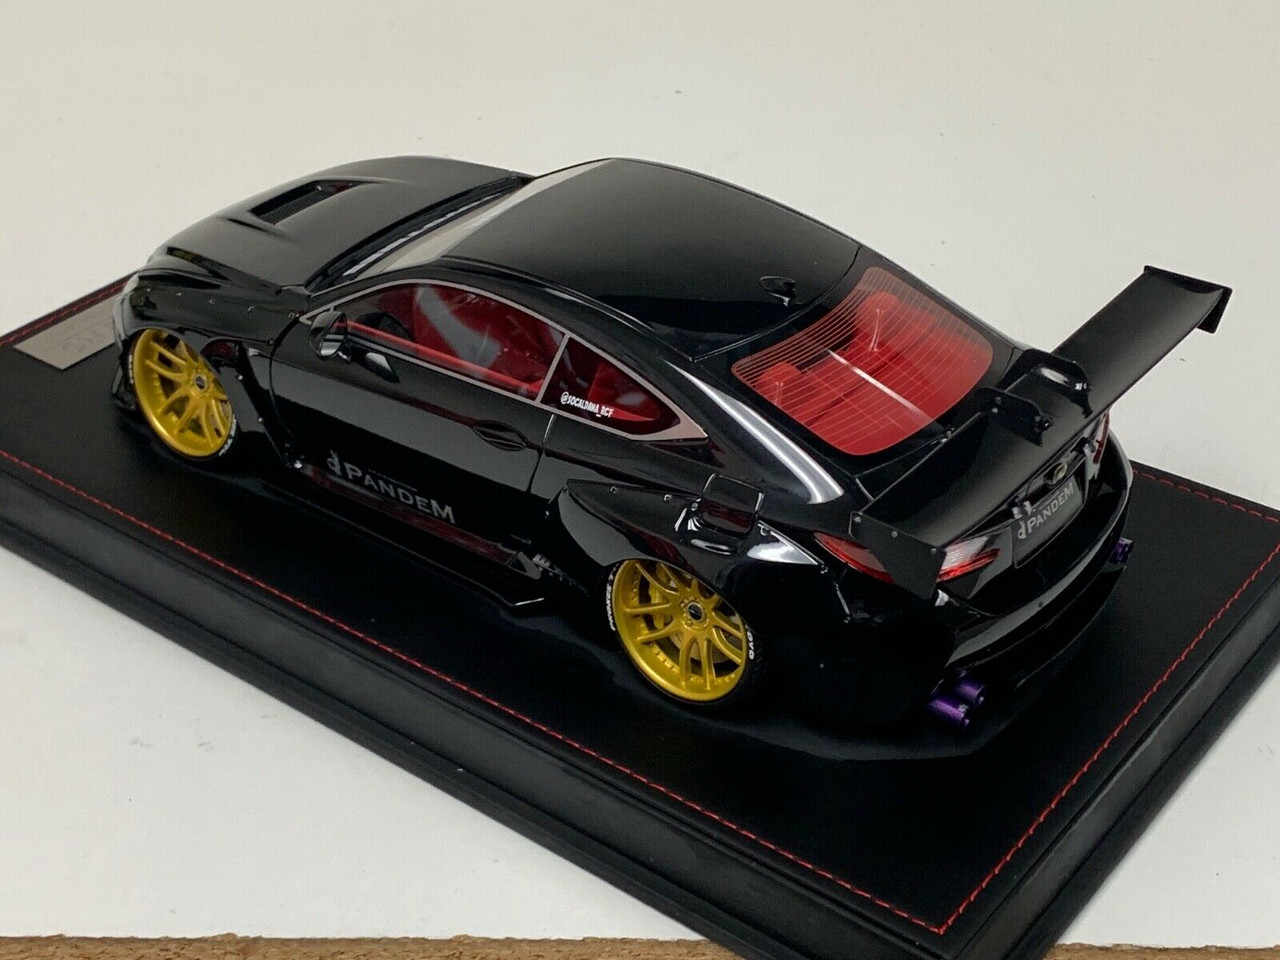 1/18 Dealer Edition Lexus RC F RCF Pandem Liberty Walk (Black with Gold Wheels) Resin Car Model Limited 100 Pieces